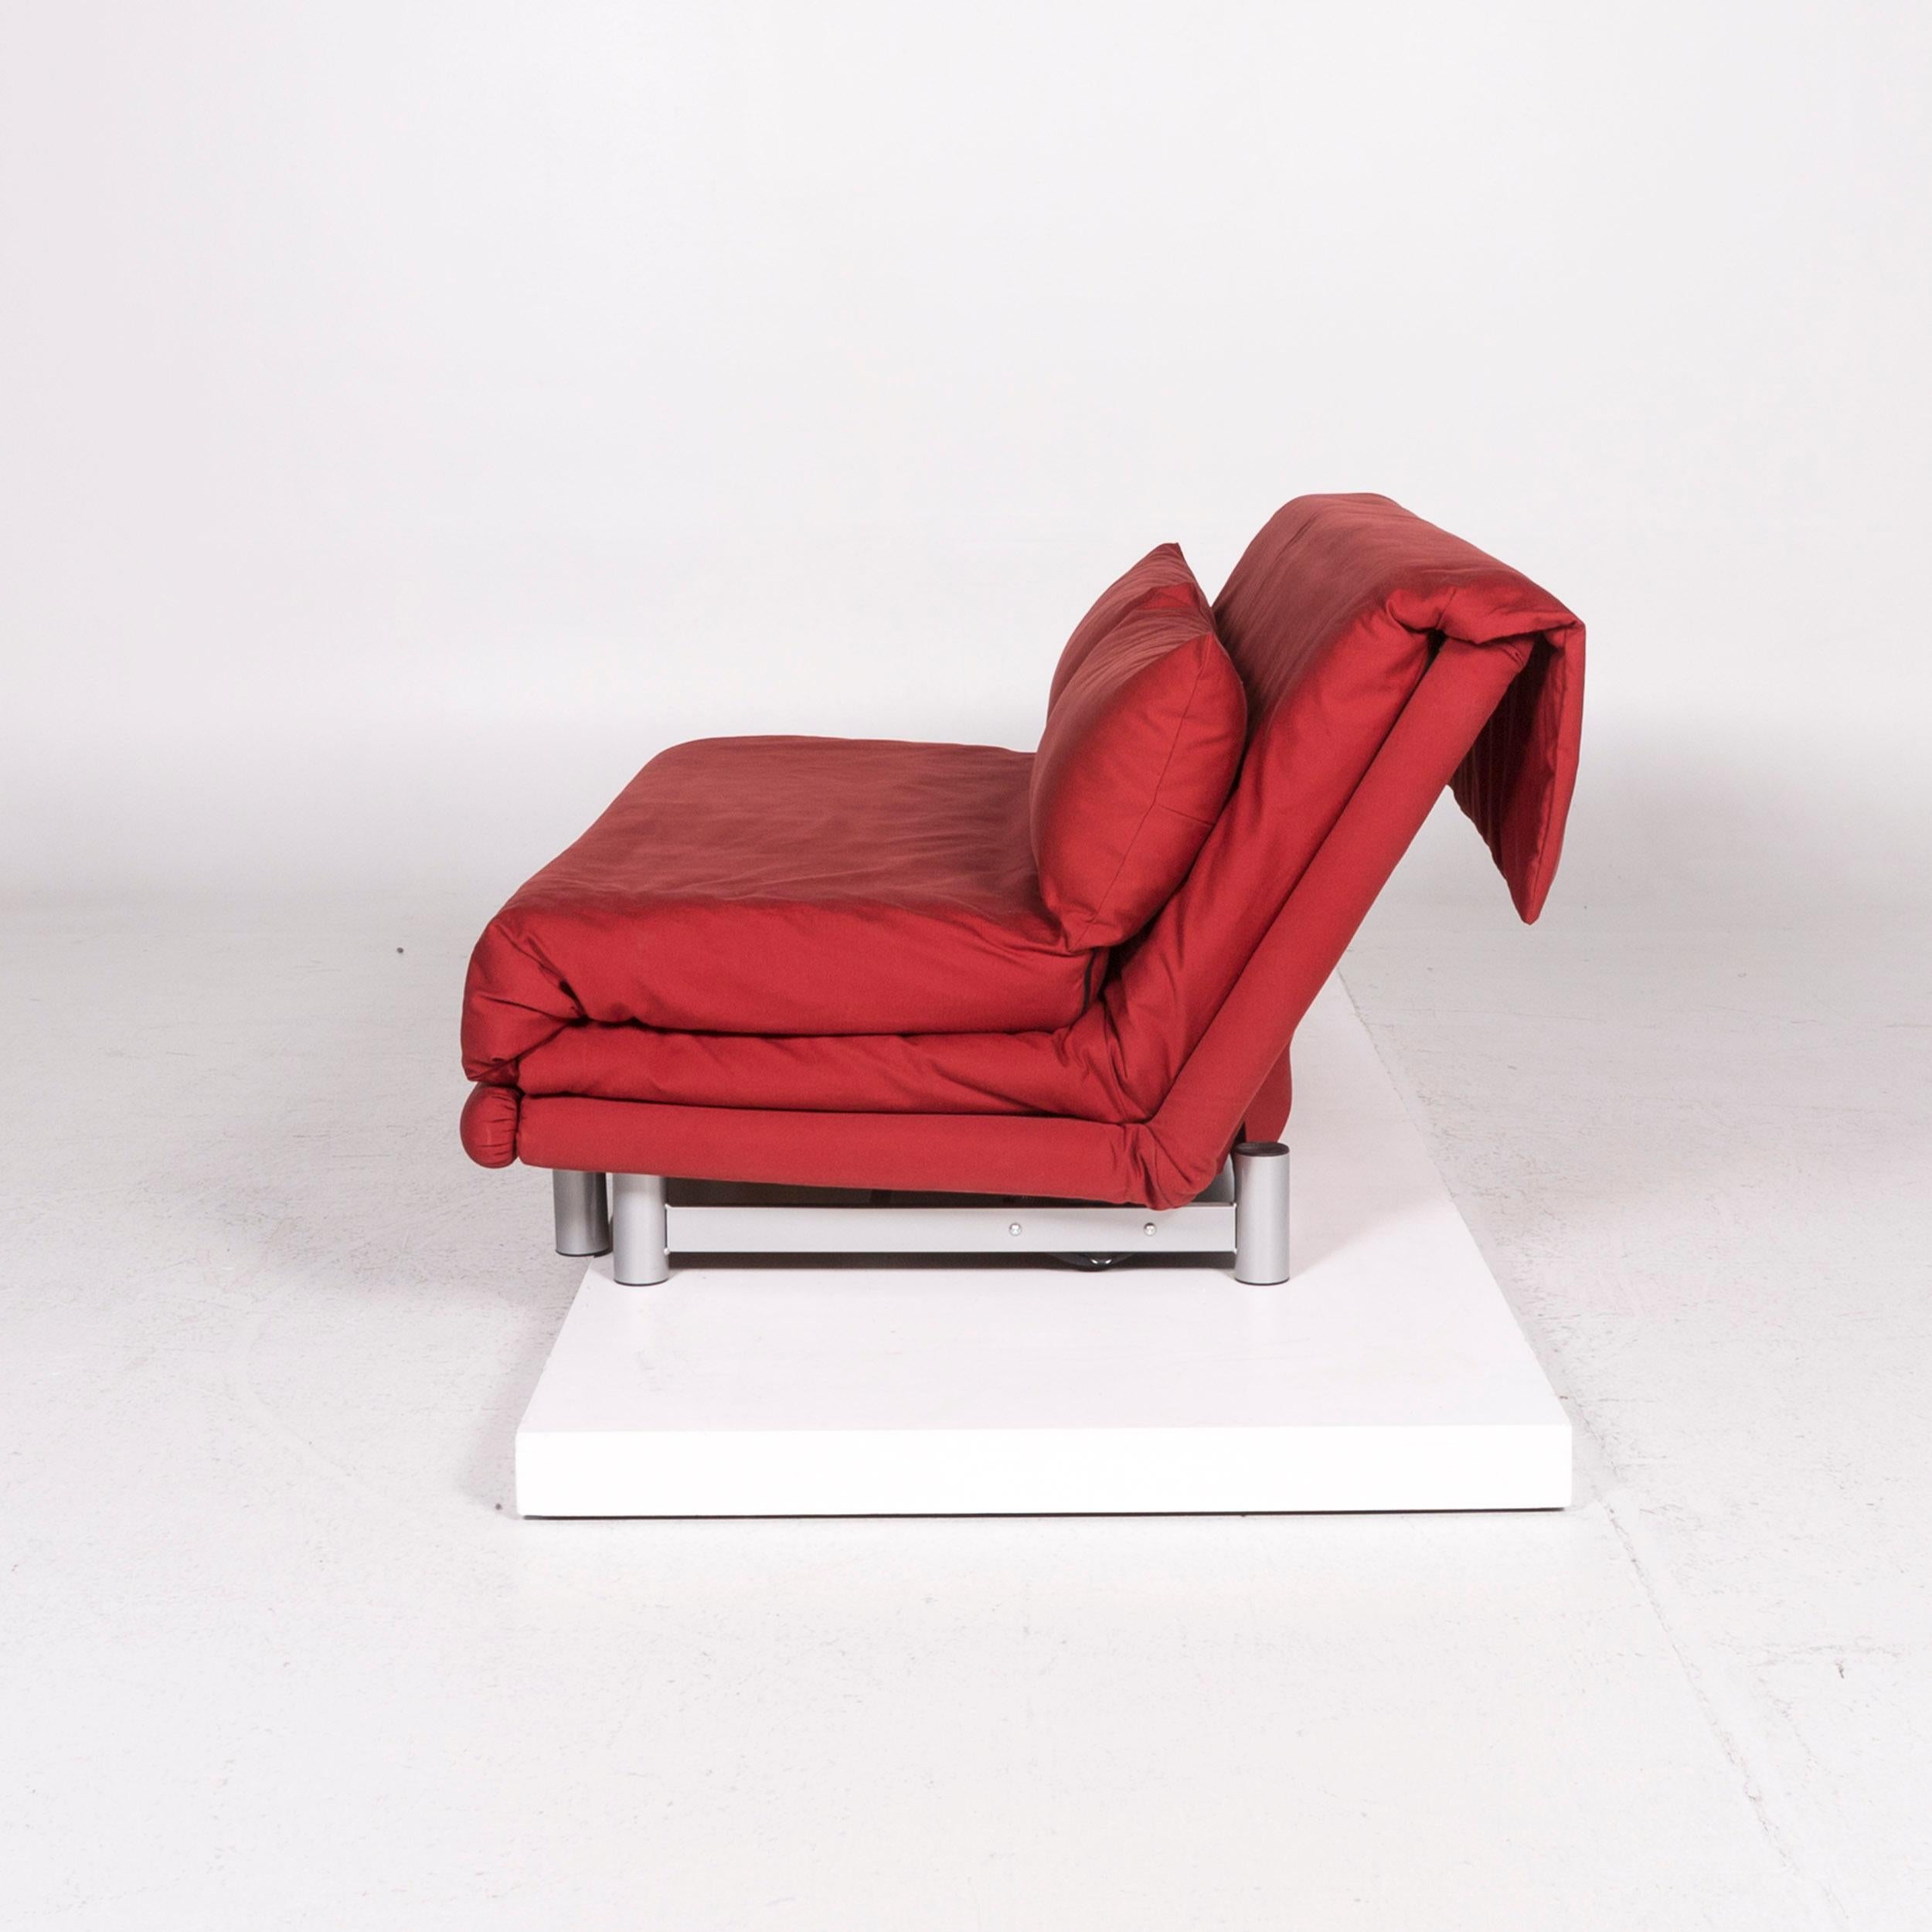 Ligne Roset Multy Fabric Sofa Bed Red Sofa Sleep Function Couch 4